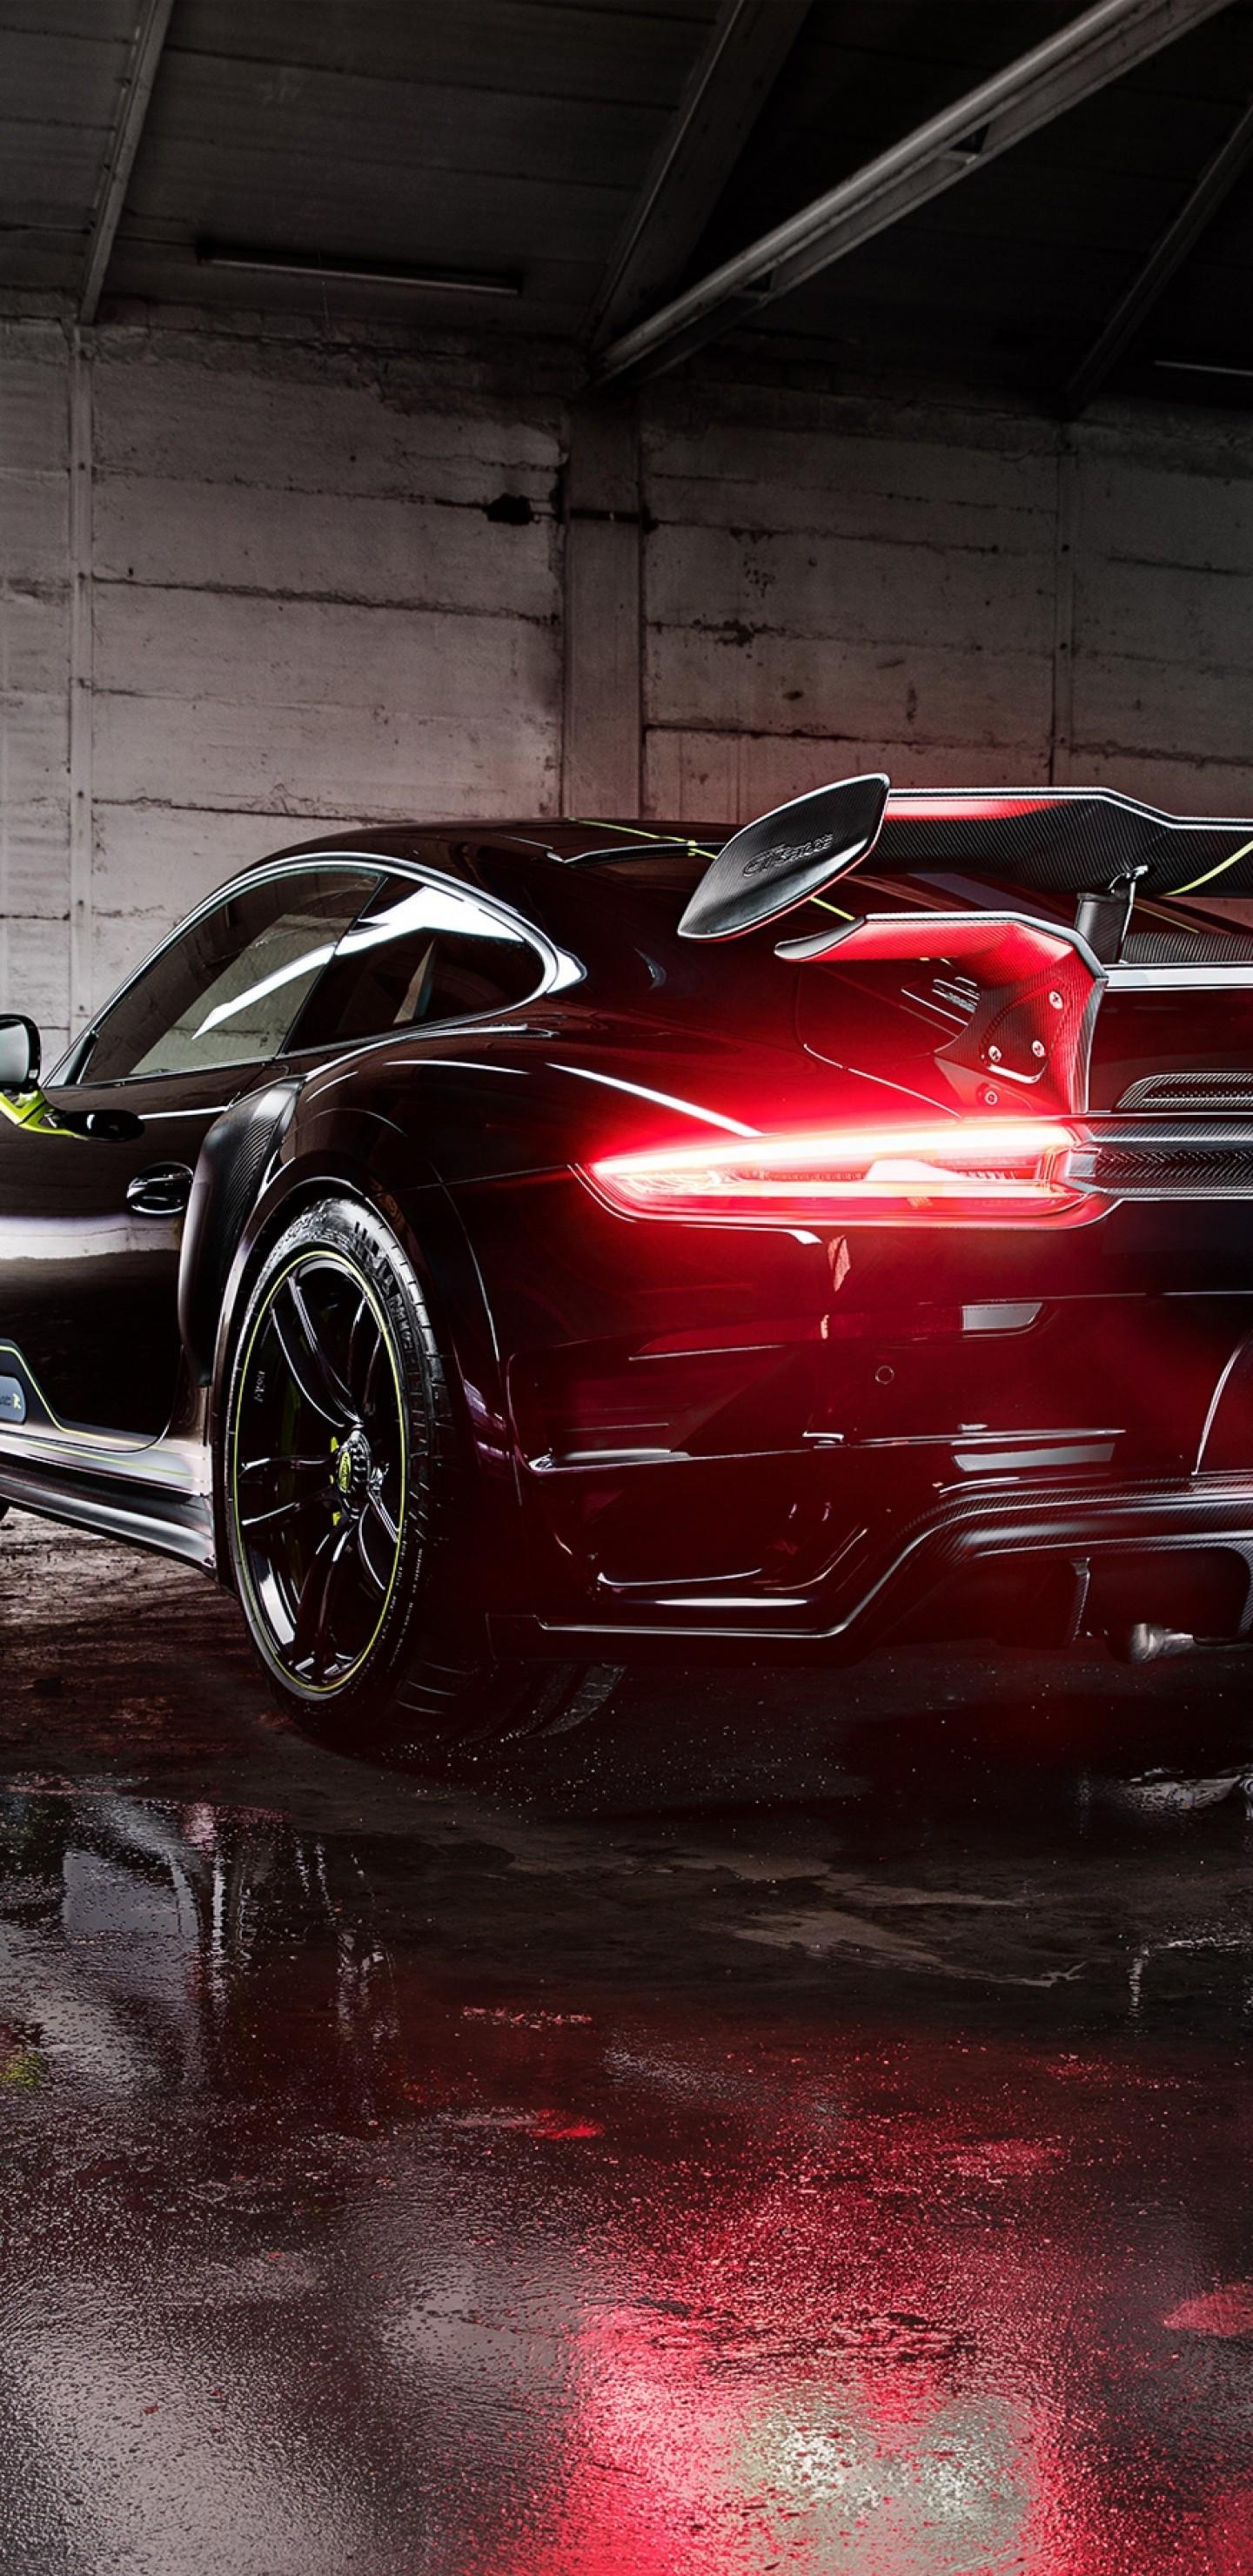 Download 1440x2960 Porsche 911 Turbo Gt, Back View, Black, Supercar, Cars Wallpaper for Samsung Galaxy S Note S S8+, Google Pixel 3 XL